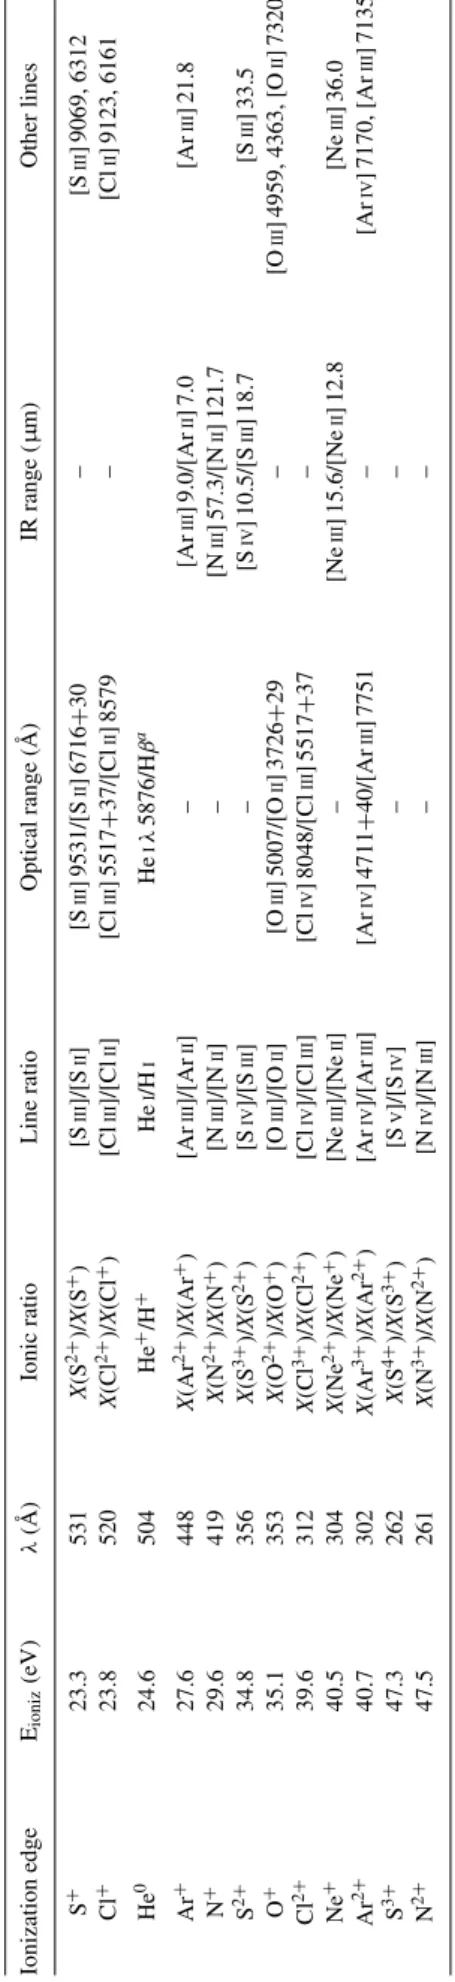 Table B1 gives the list of available nebular line ratios. For N, O, Ne, S, Cl and Ar, only nebular and fine-structure lines resulting from the lower energy levels are considered